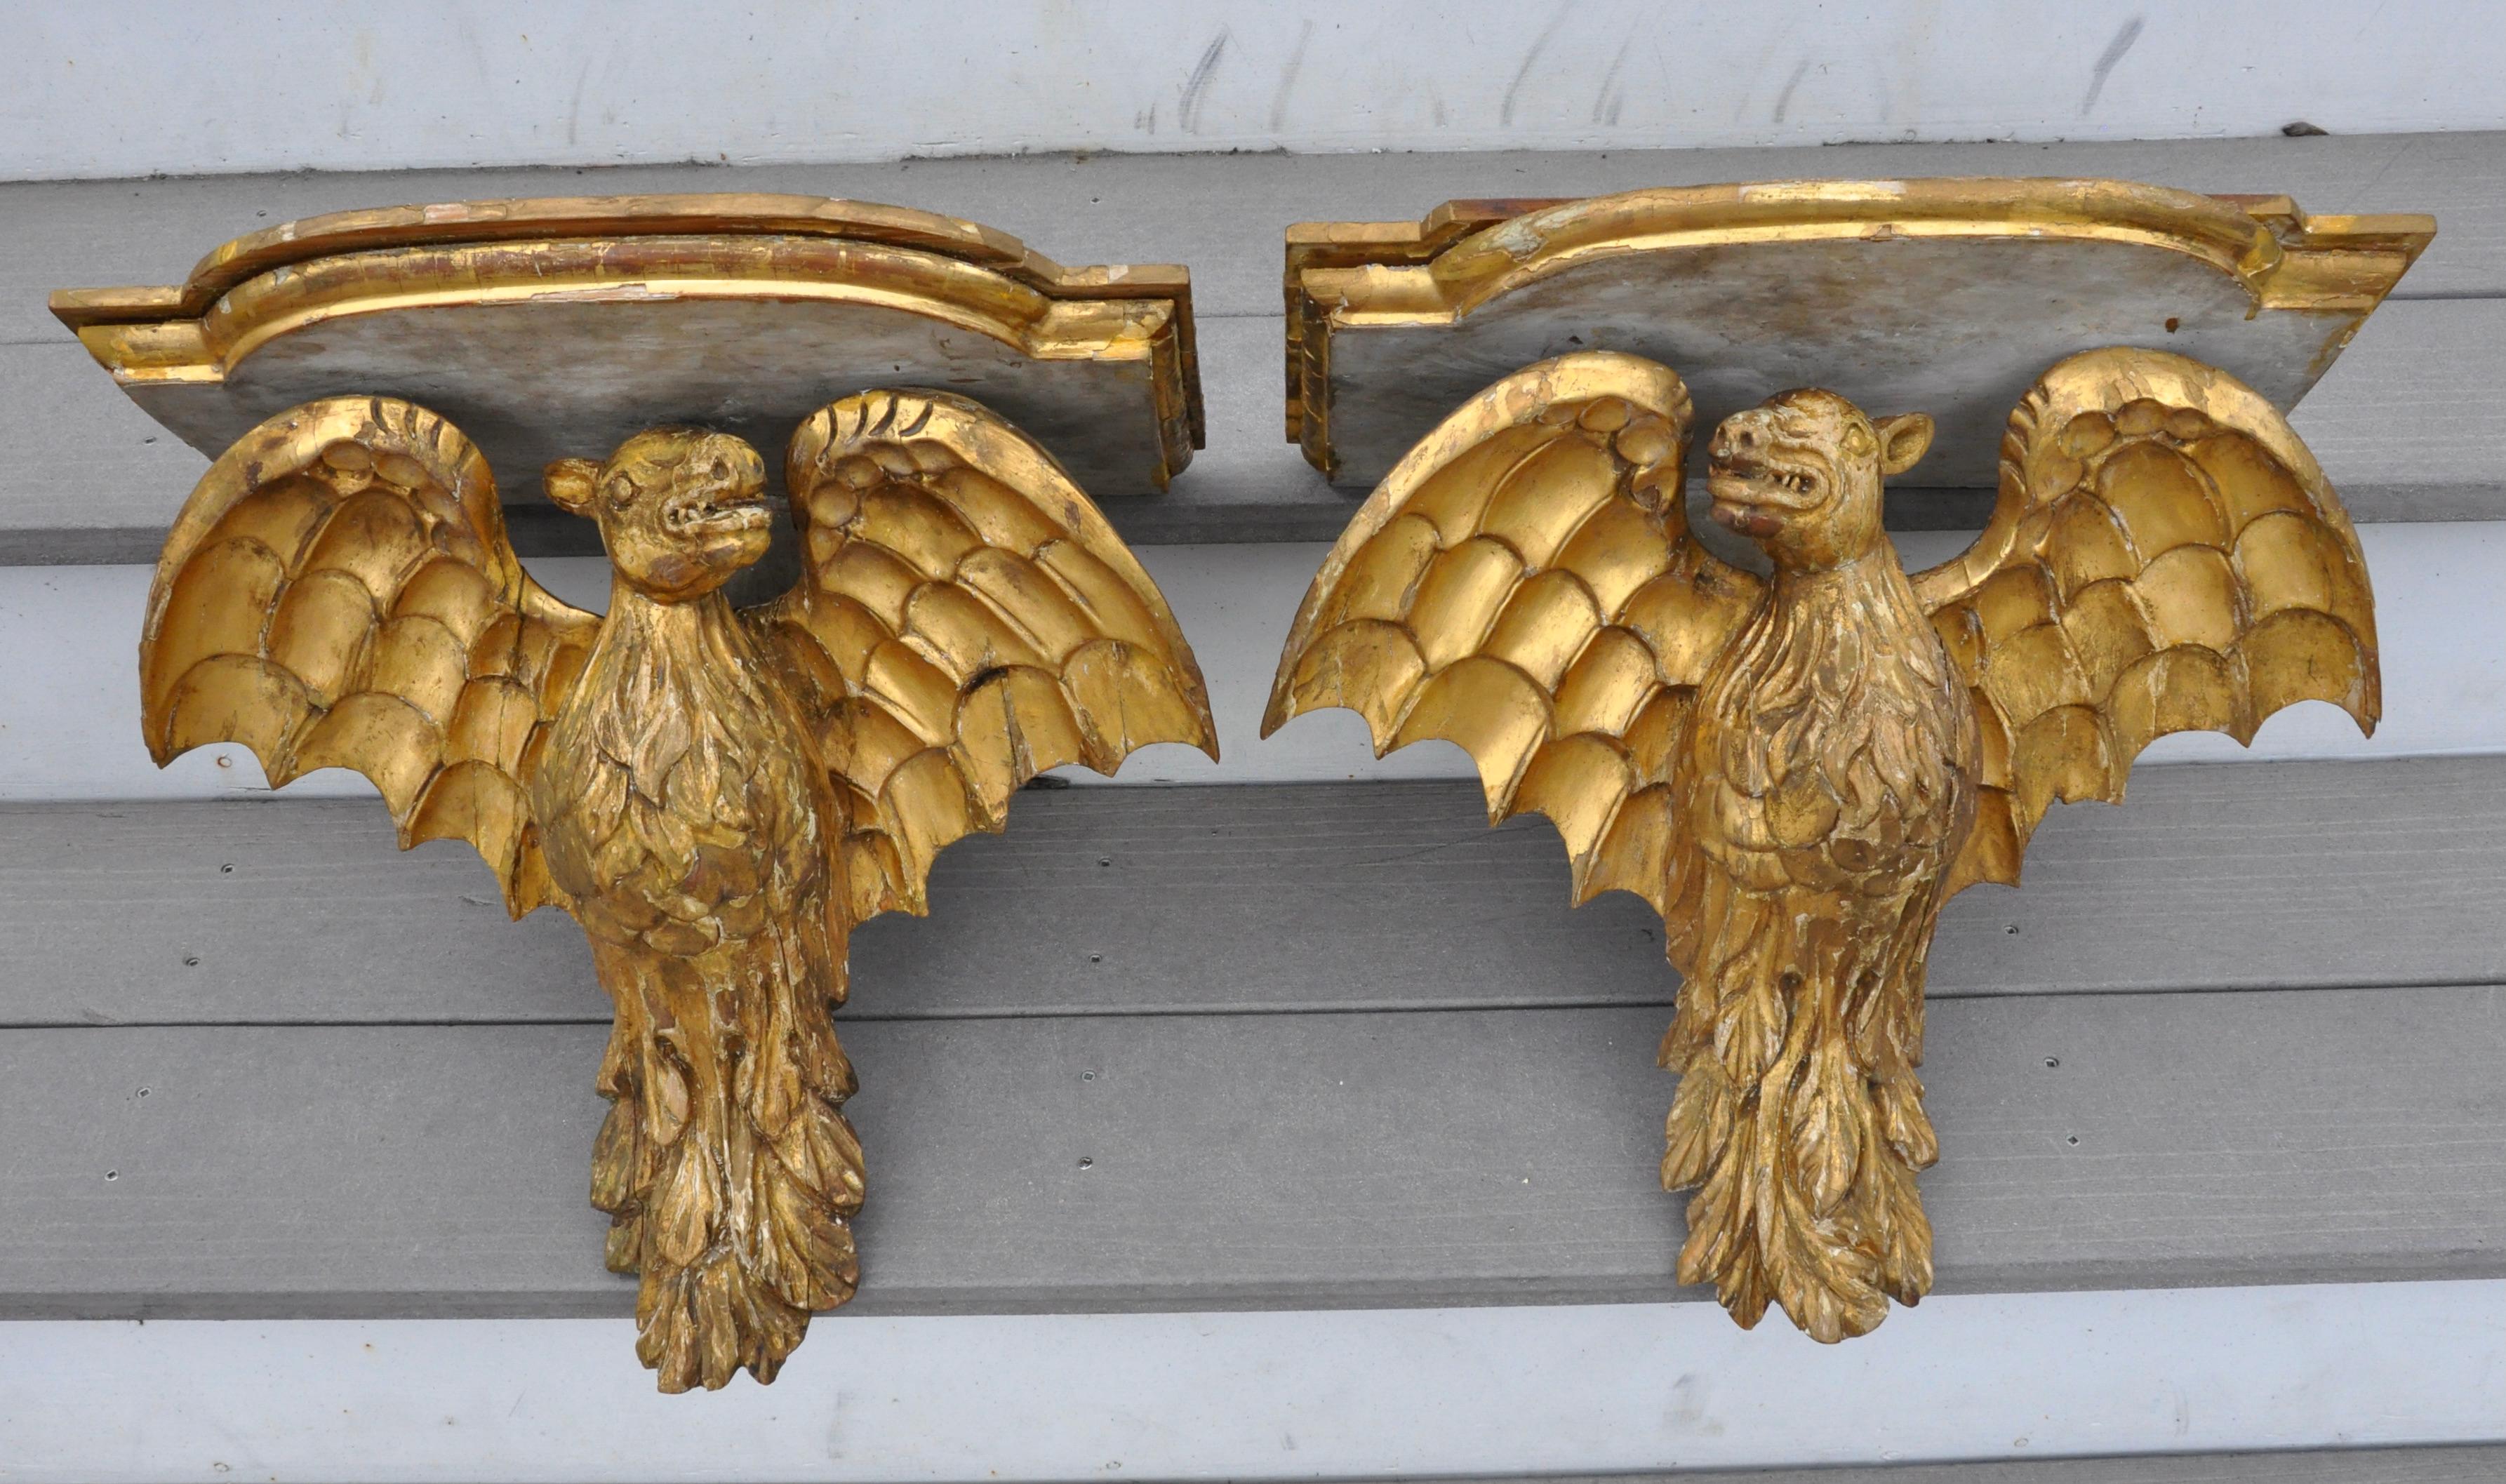 Pair of rare 19th century Italian carved and gilt wood bat form wall brackets. Original gilding. As found. Rare and wonderful.

Neoclassical and Gothic, in time for Halloween.